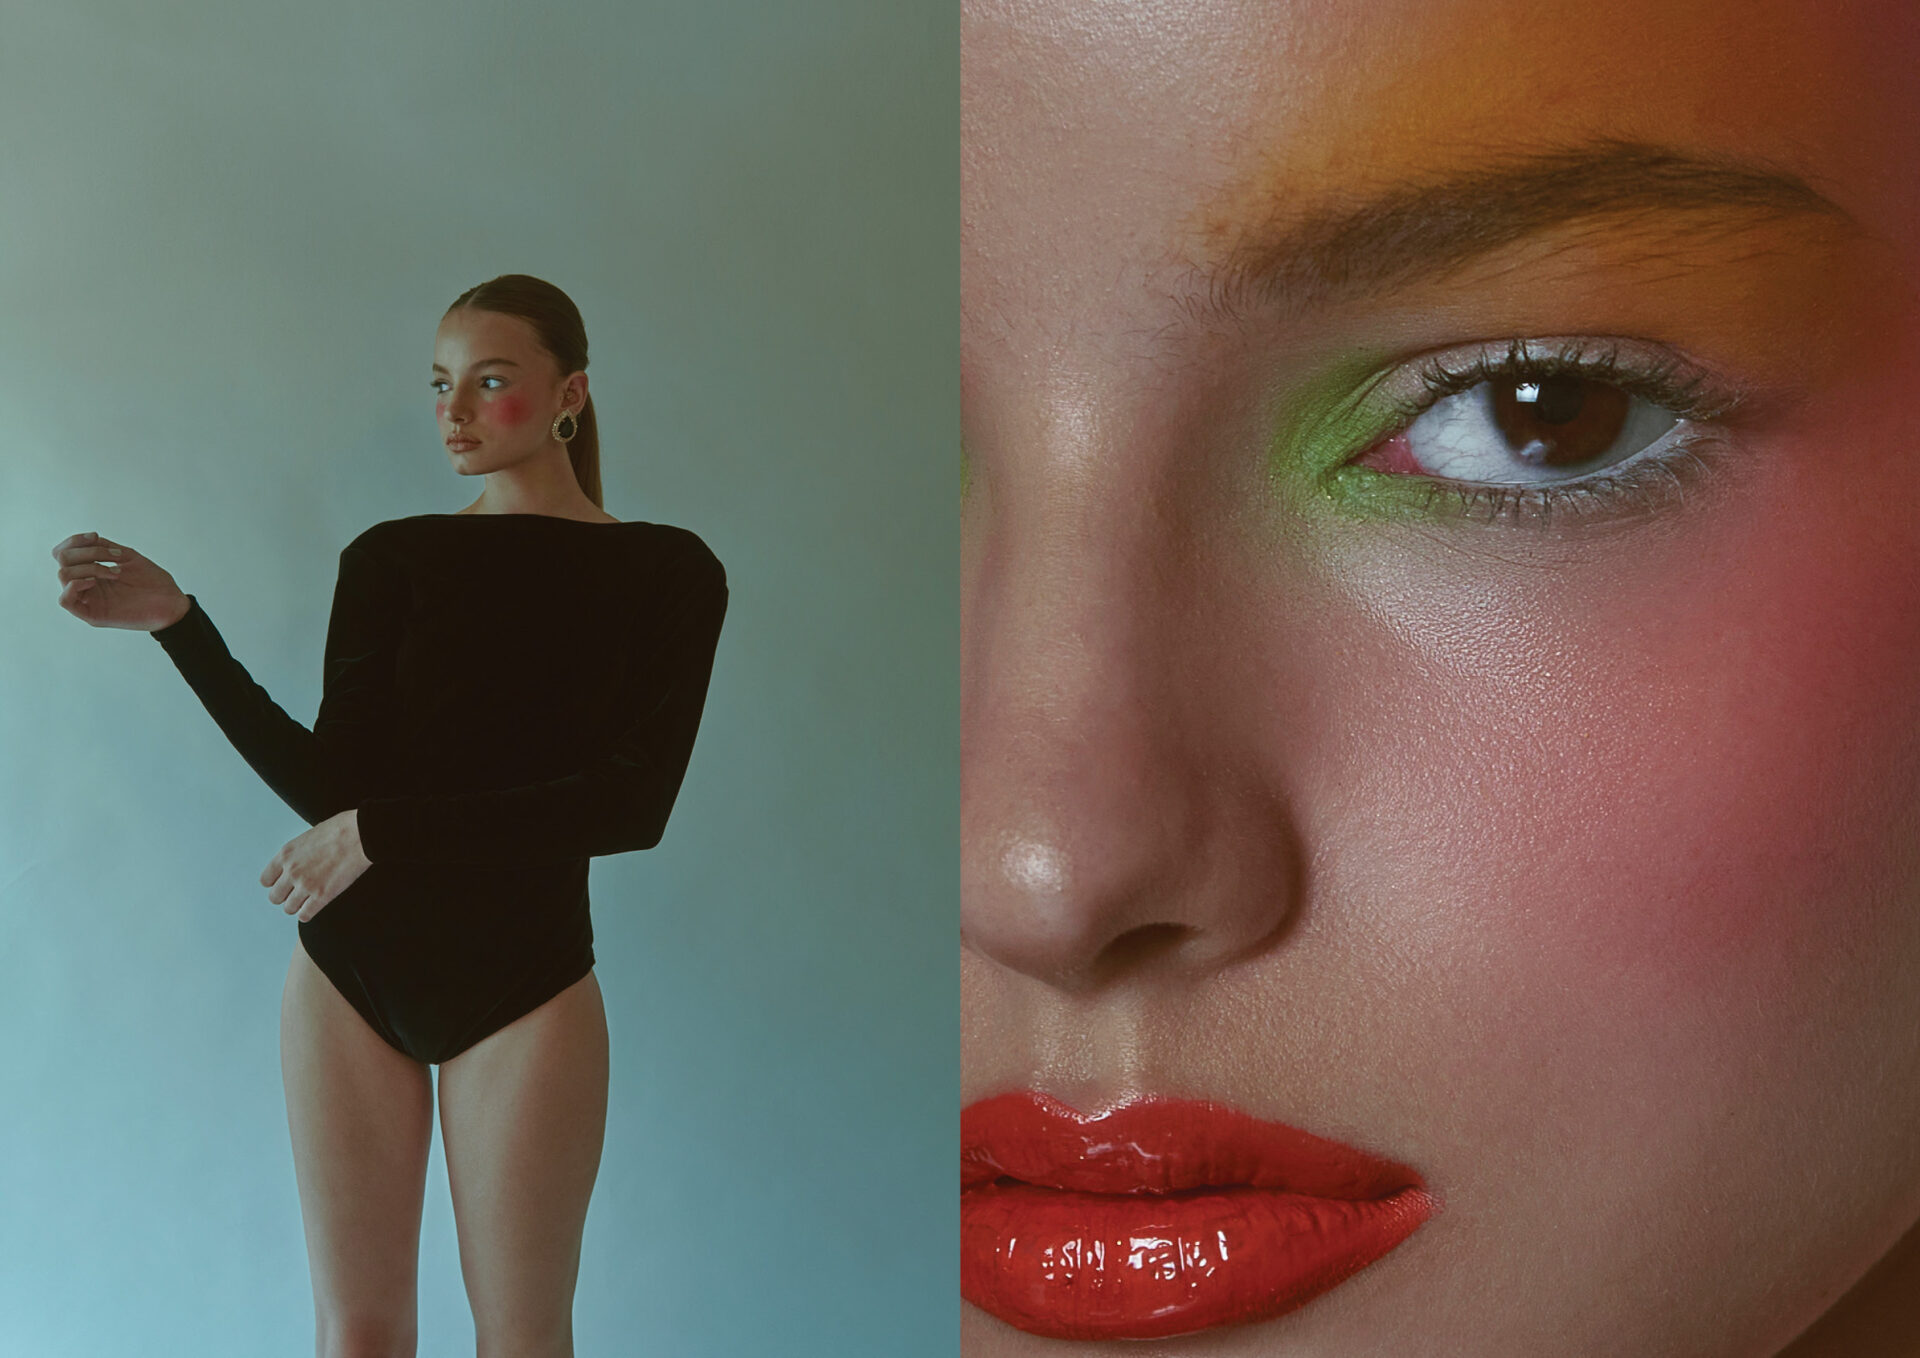 "TWO" by Karla Figueroa with Florencia Menegazzo and Cósima Fricke from We love models agency. Make up by Juan Ignacio Ormeño